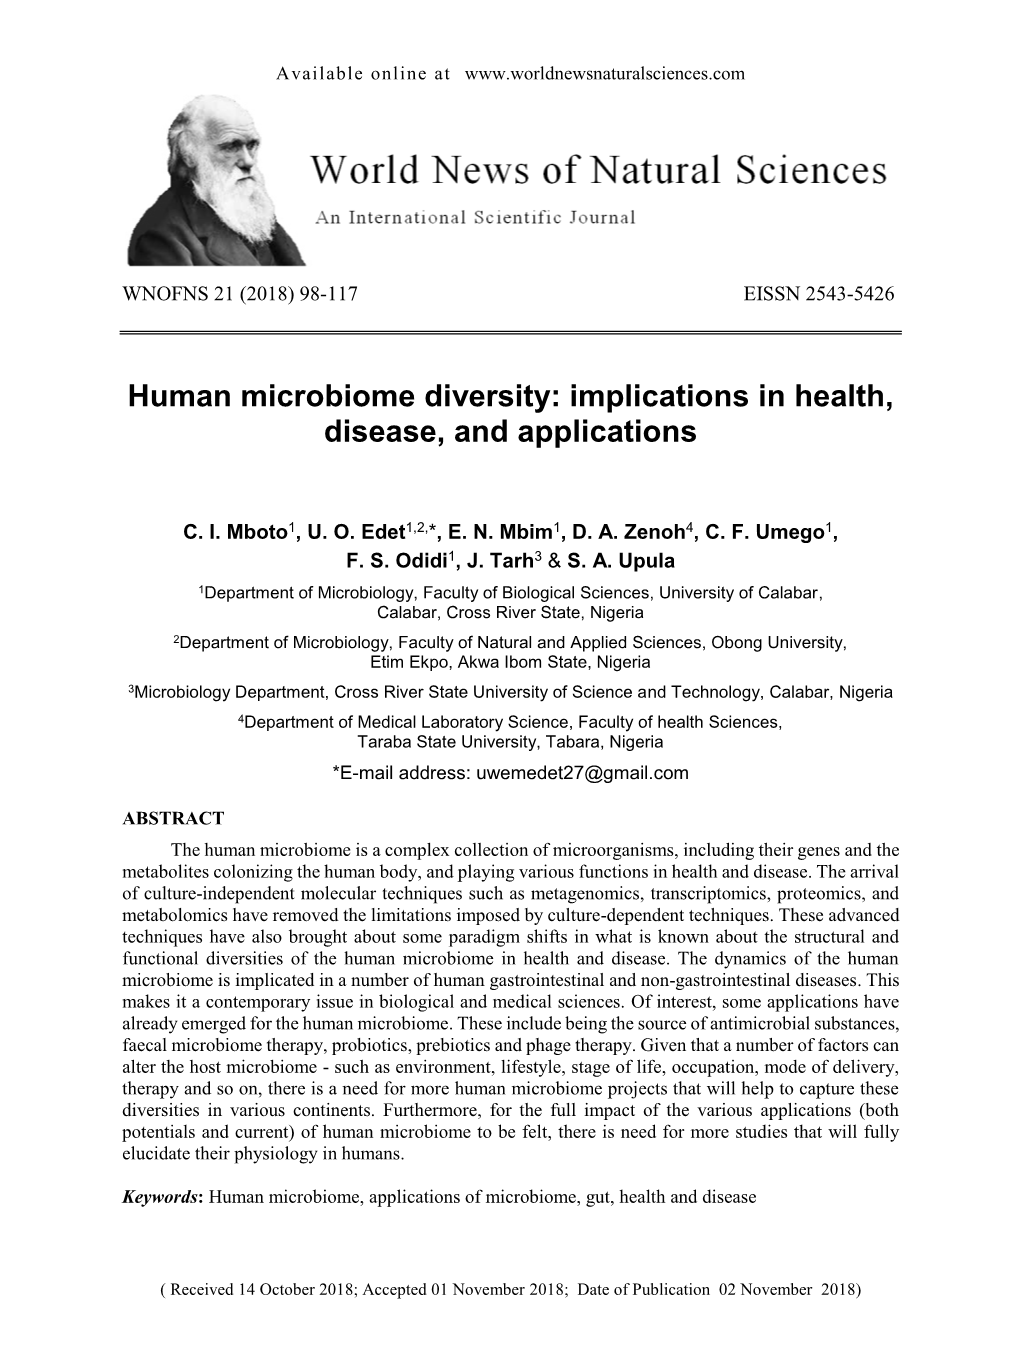 Human Microbiome Diversity: Implications in Health, Disease, and Applications